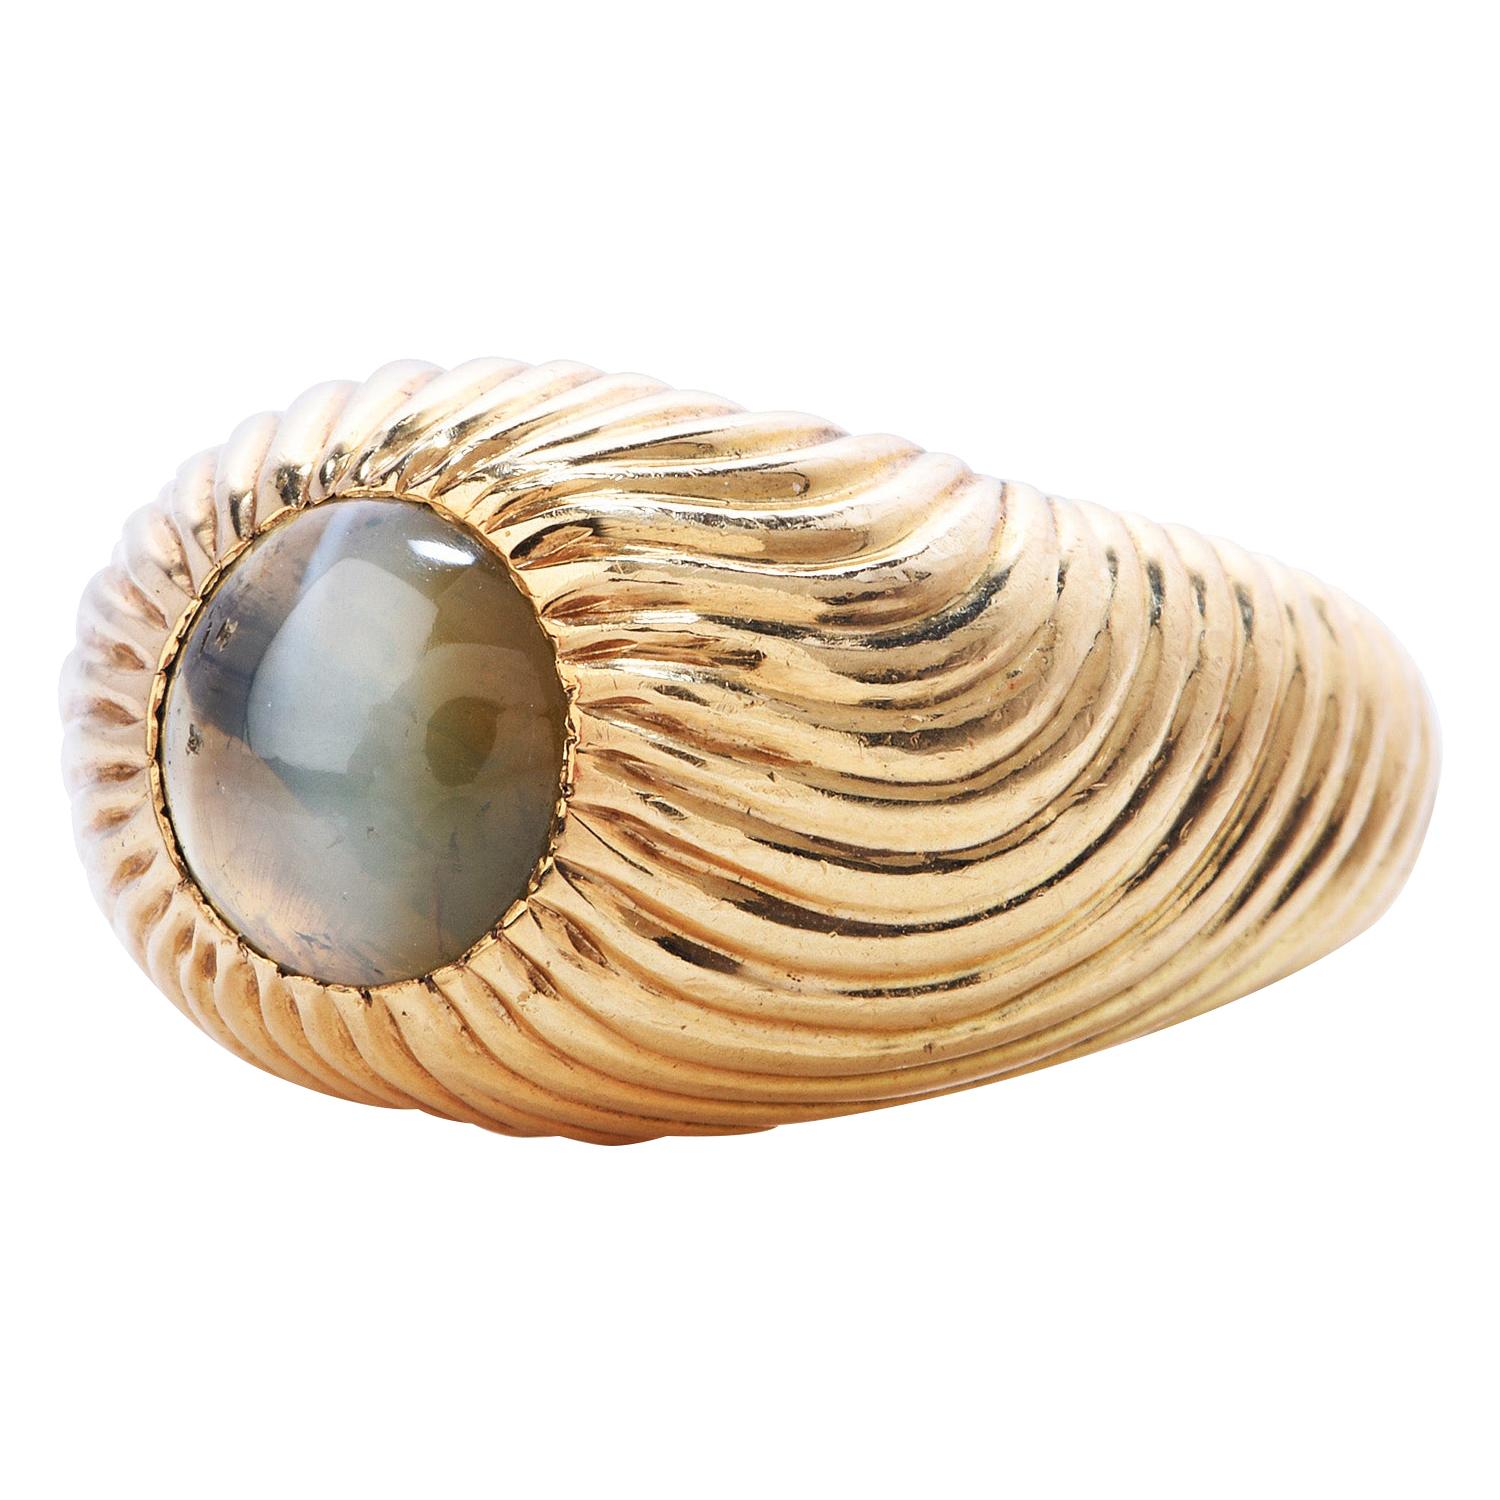 Classic Men's cats eye vintage ring has a classic textured design, crafted in 18K yellow gold.

Featuring a stunning 3.97-carat all-natural chrysoberyl cat's eye, cabochon round cut, bezel set. The cat's eye is strong and centered.

Ring Size: 6